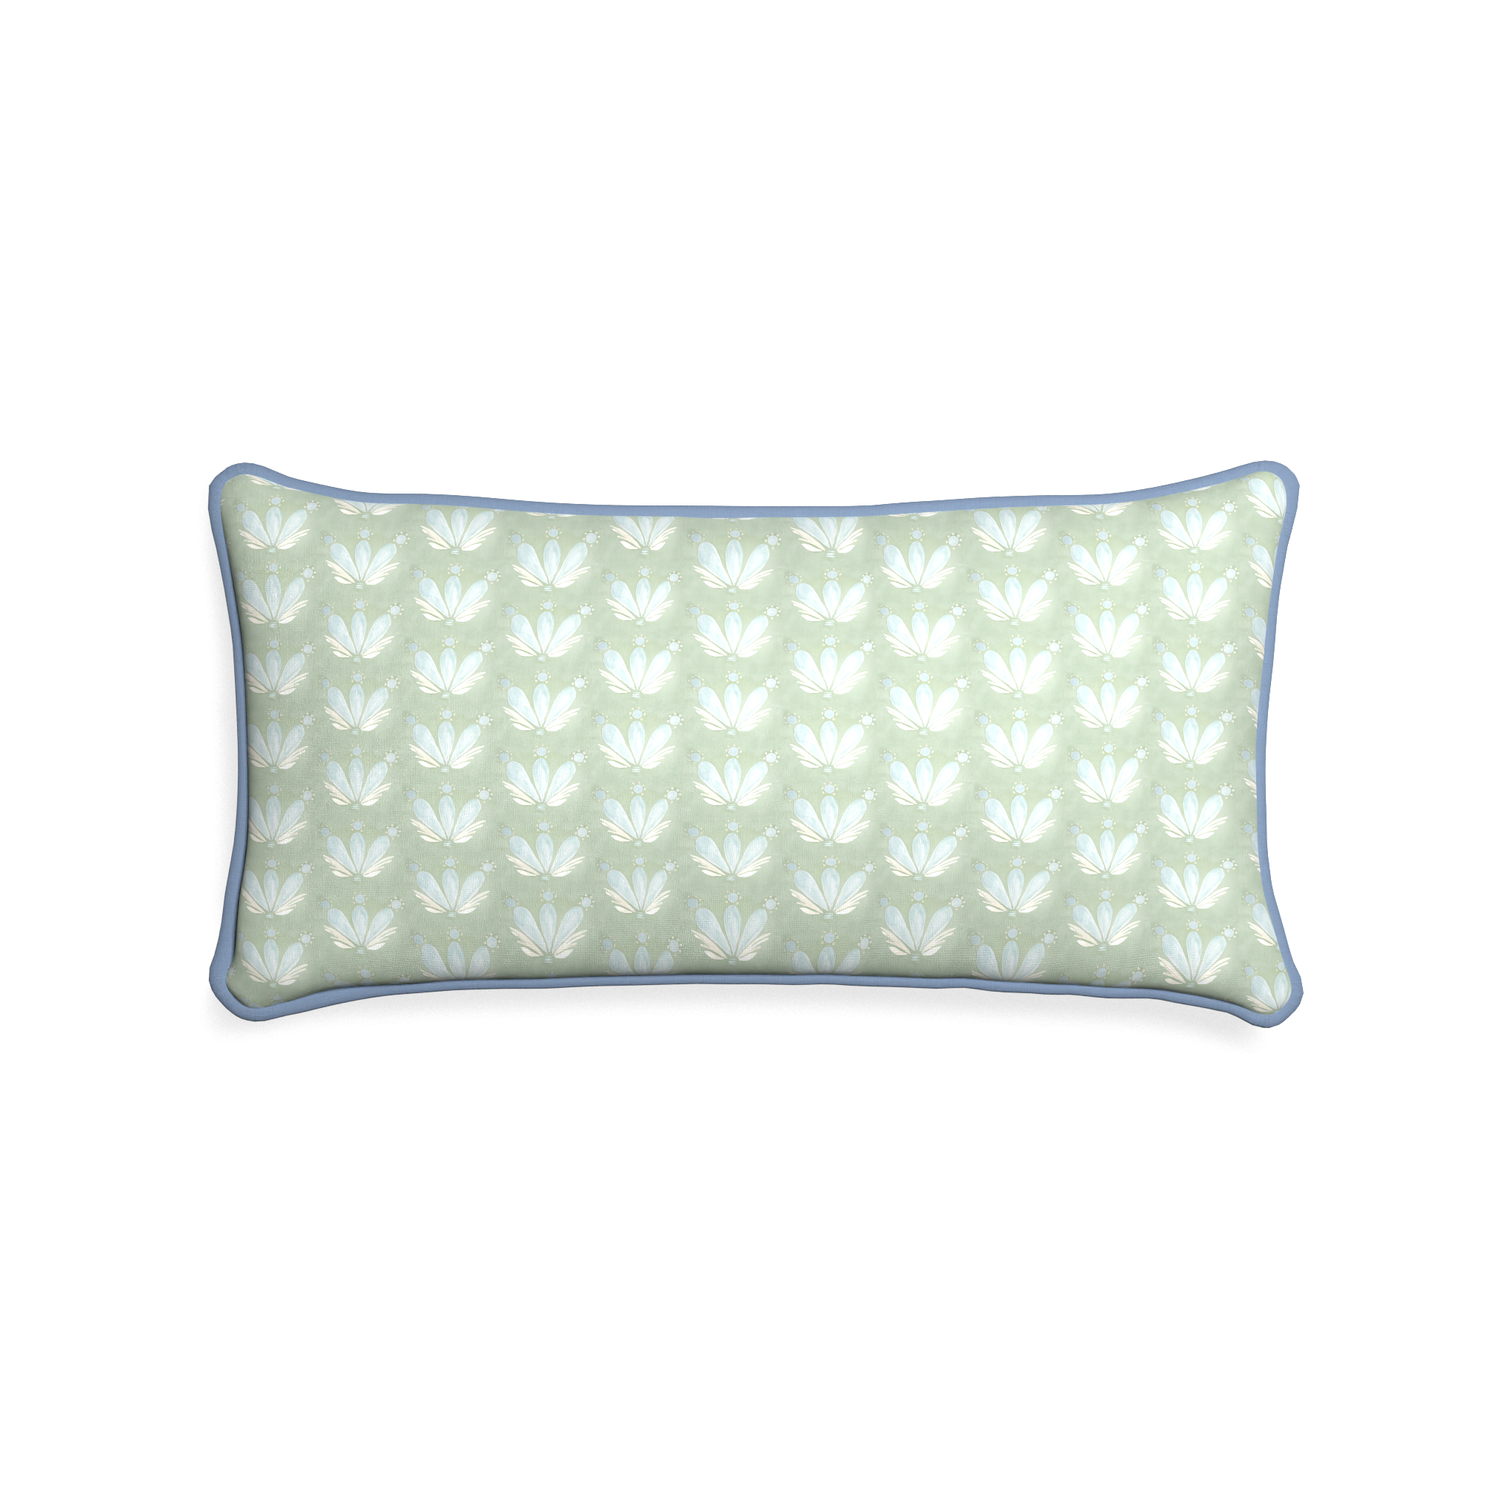 Midi-lumbar serena sea salt custom blue & green floral drop repeatpillow with sky piping on white background